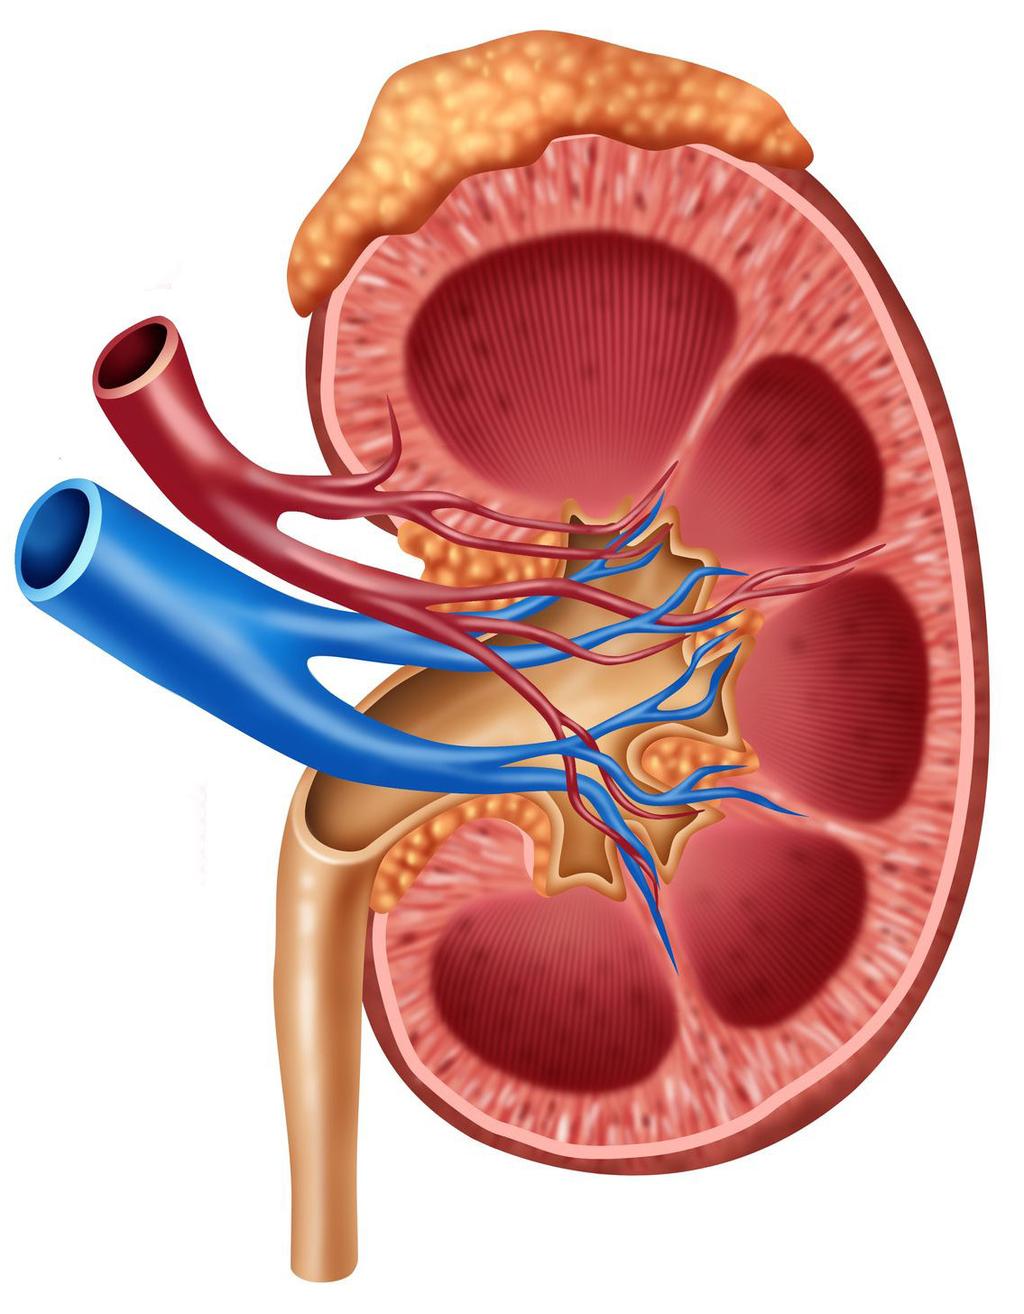 Blood enters the kidney here, through the renal artery.